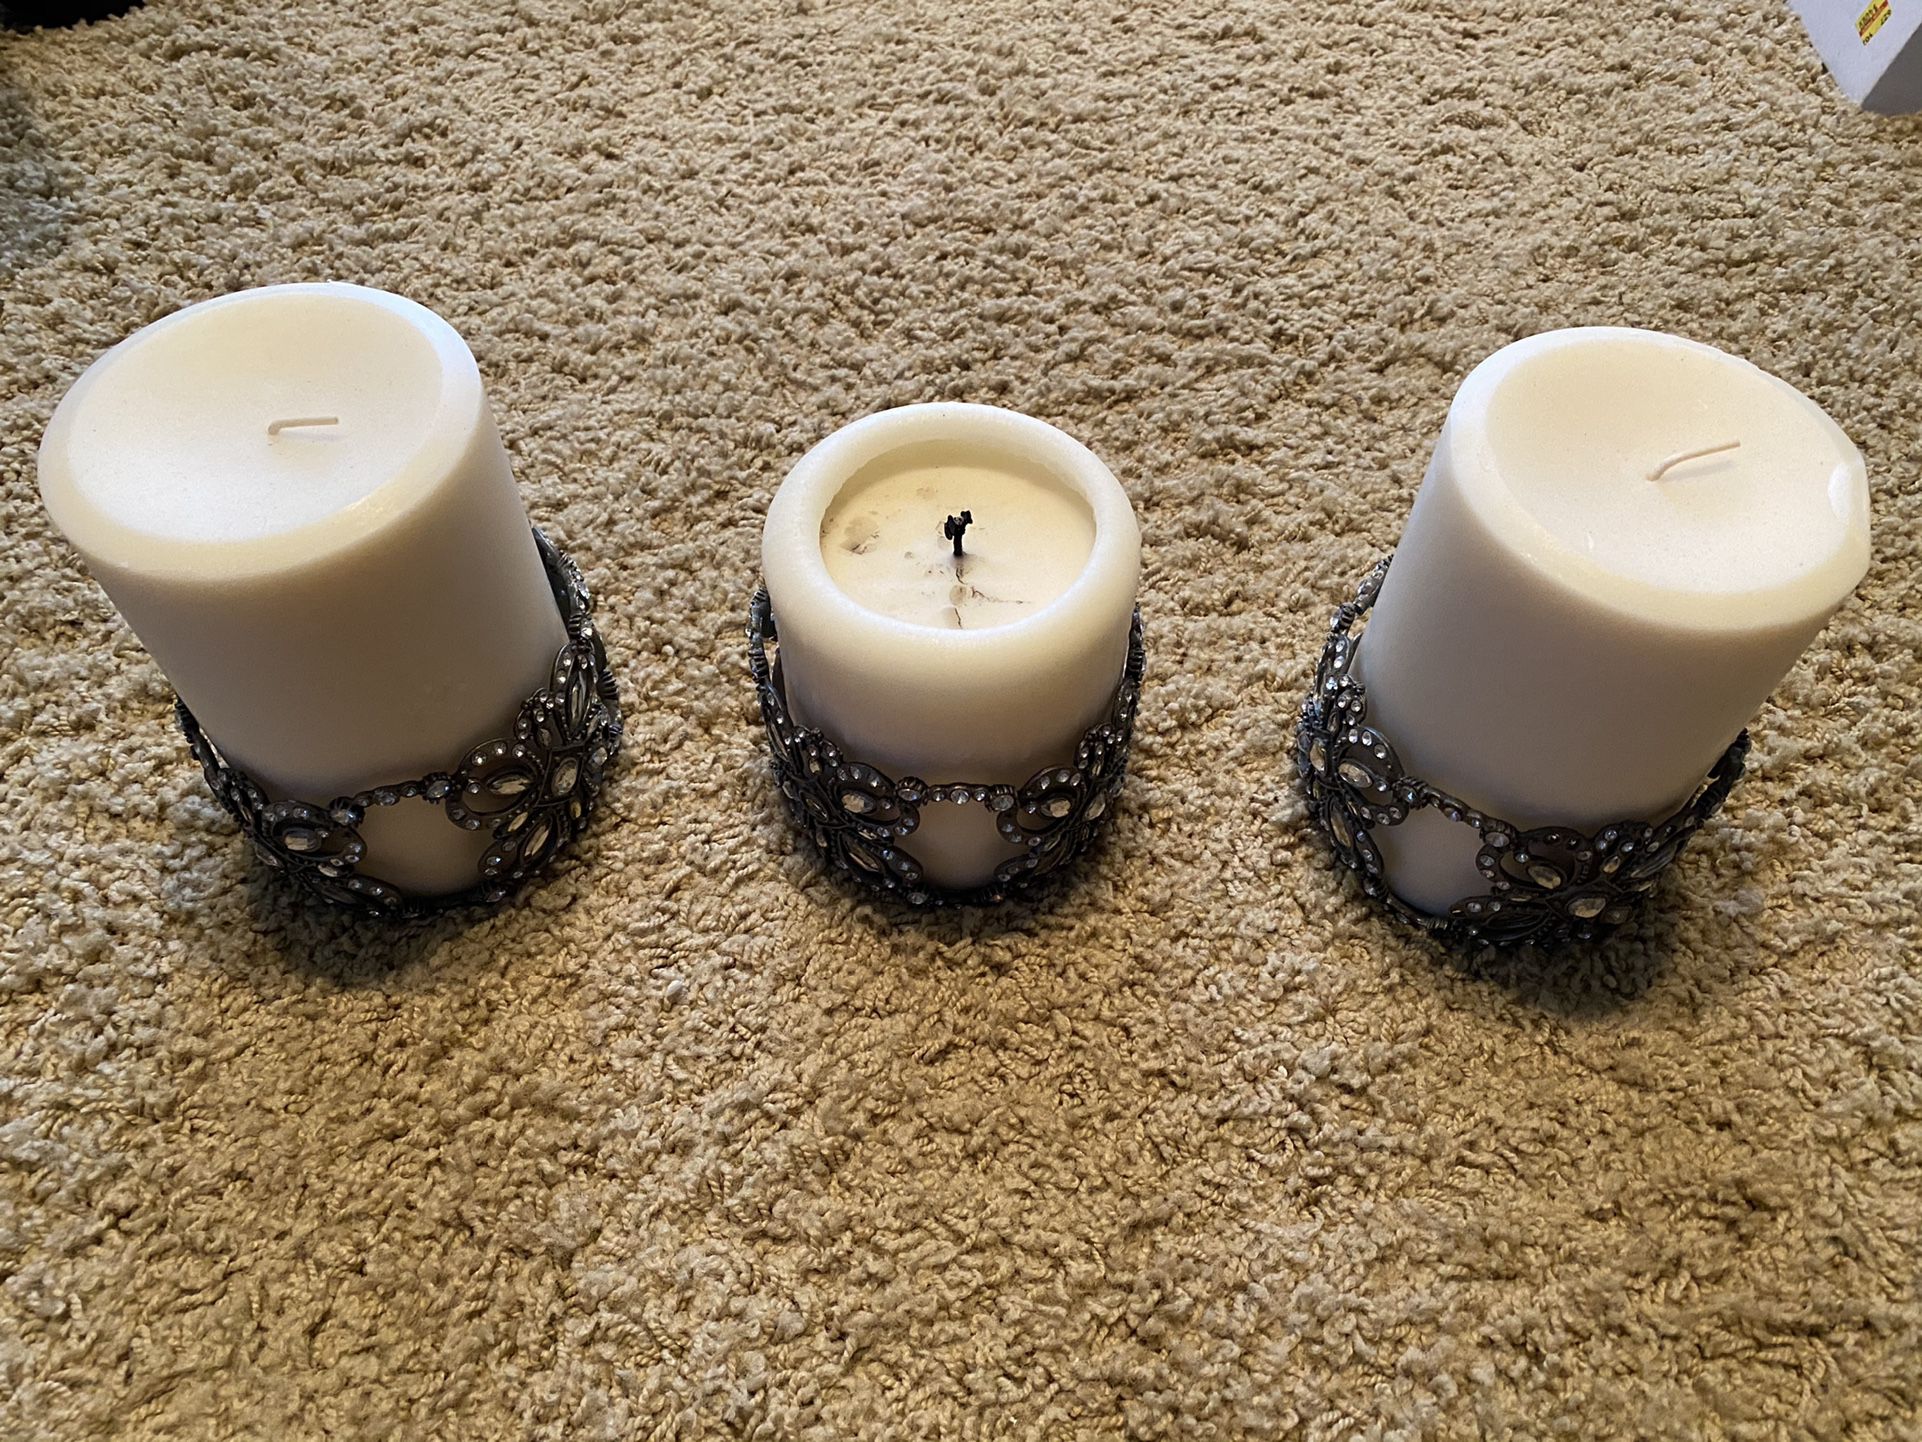 Candle Holders With Candles